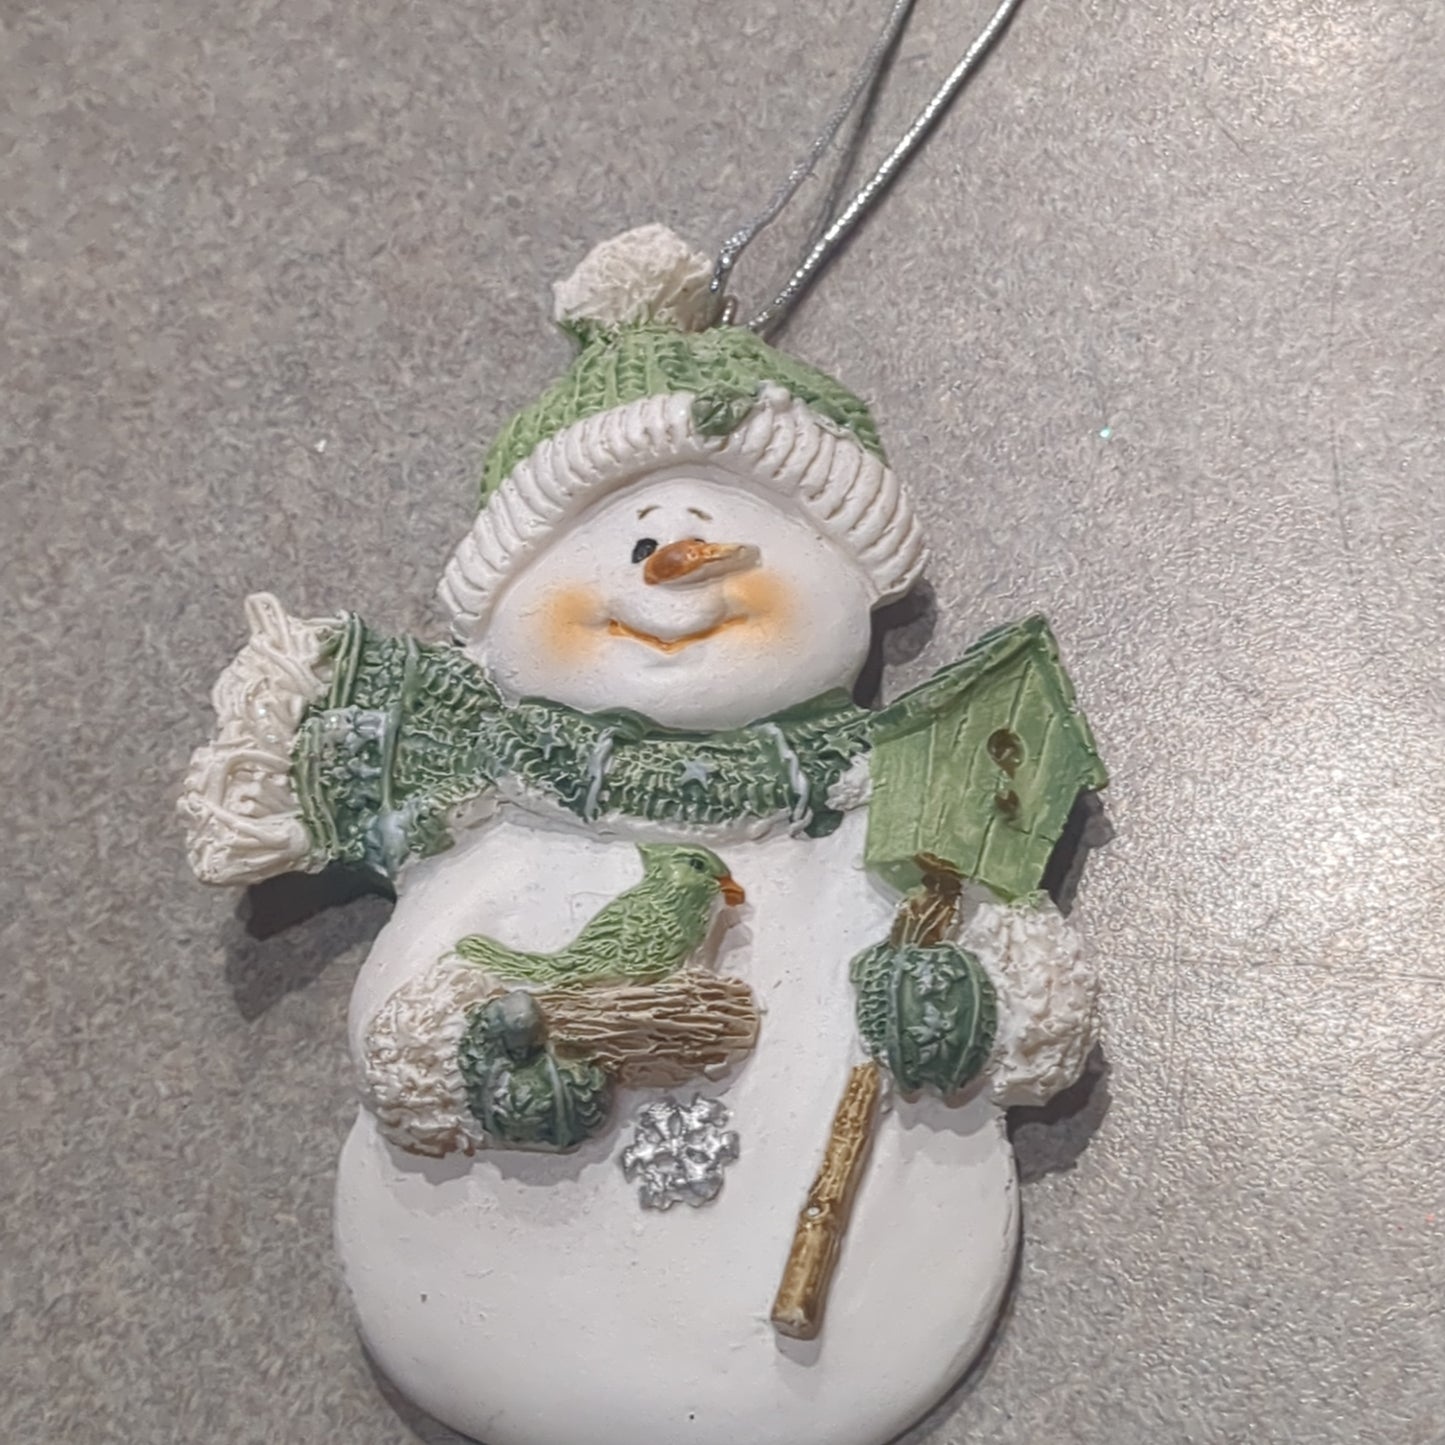 Polycrylic snowman ornament with bird and birdhouse green